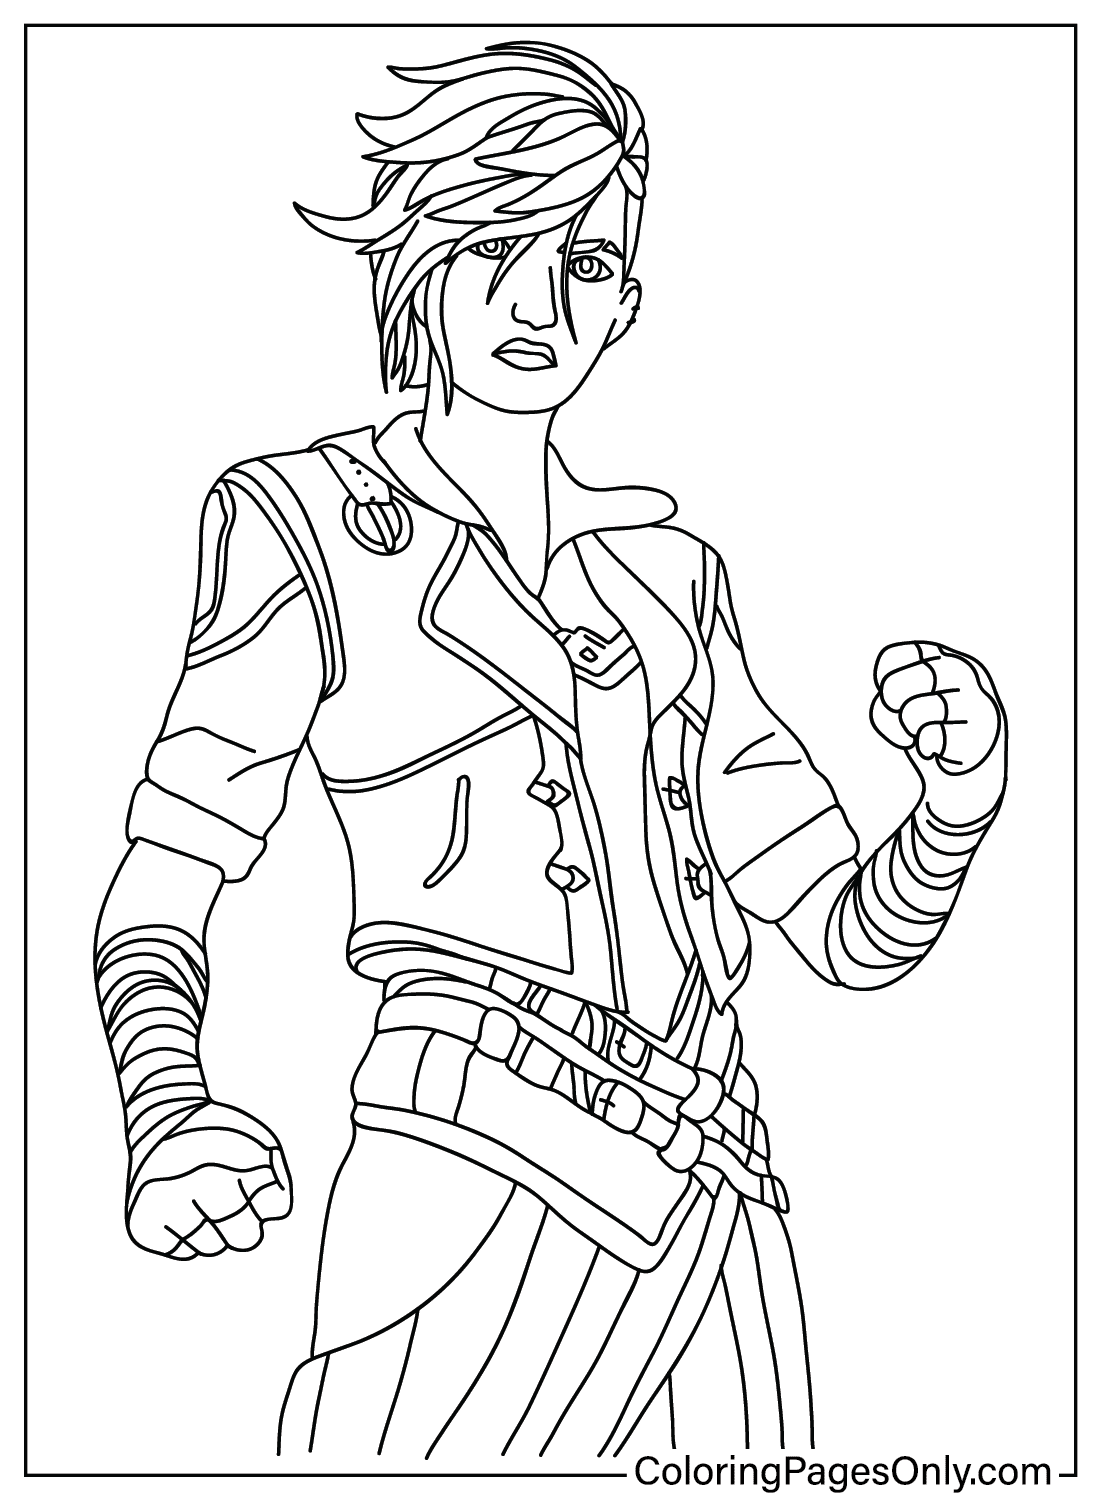 VI Teamfight Tactics Coloring Page - Free Printable Coloring Pages